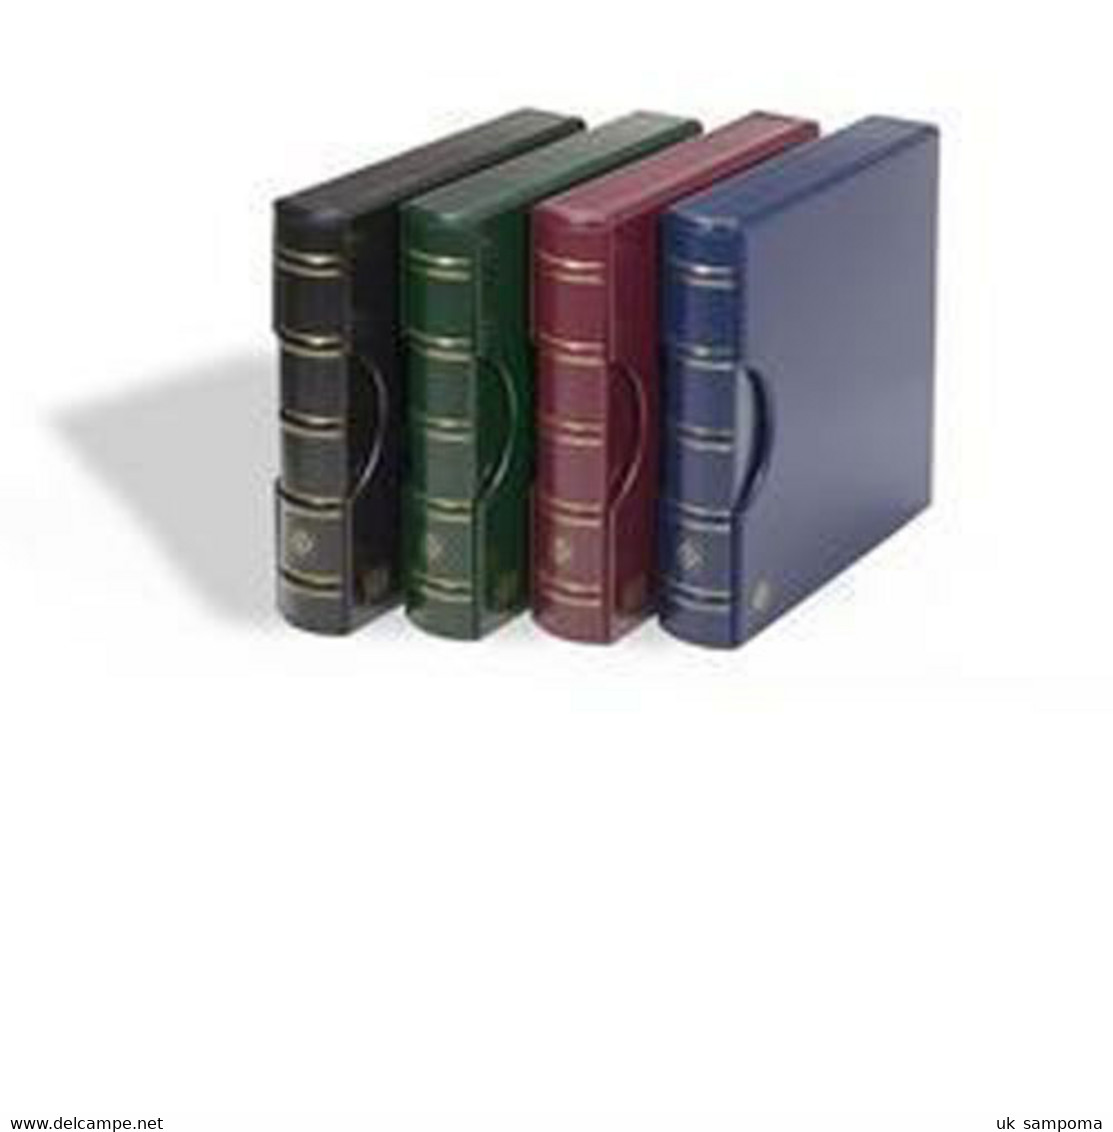 LIGHTHOUSE Ring Binder EXCELLENT DE, In Classic Design With Slipcase, Green - Large Format, Black Pages